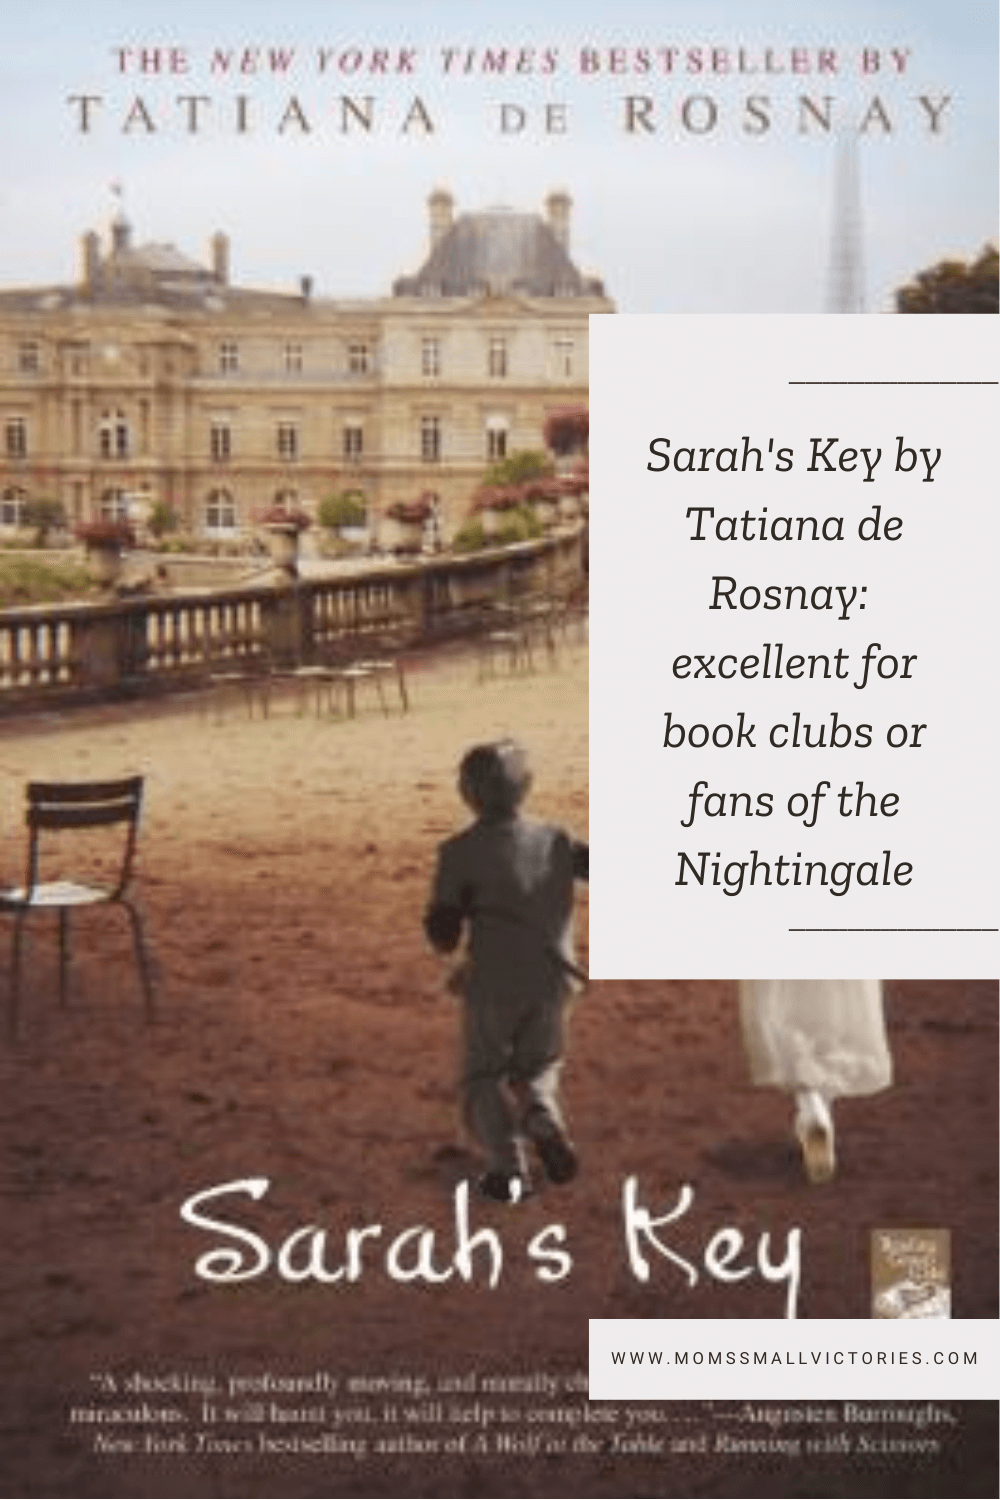 sarahs key by tatiana de rosnay is an excellent book suggestion for book clubs or fans of the Nightingale